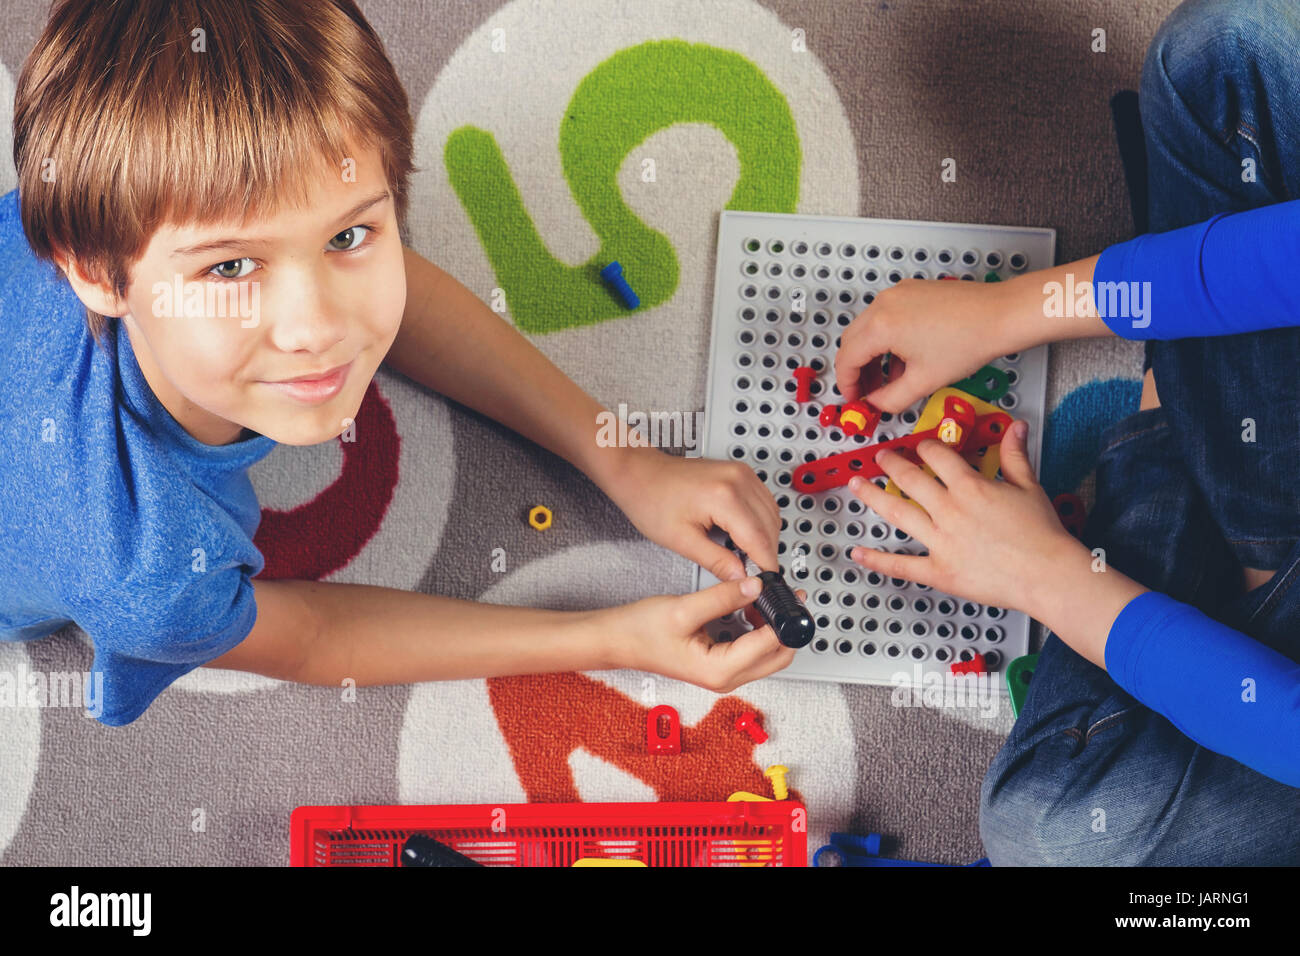 Children playing with toys tool kit.Top view Stock Photo